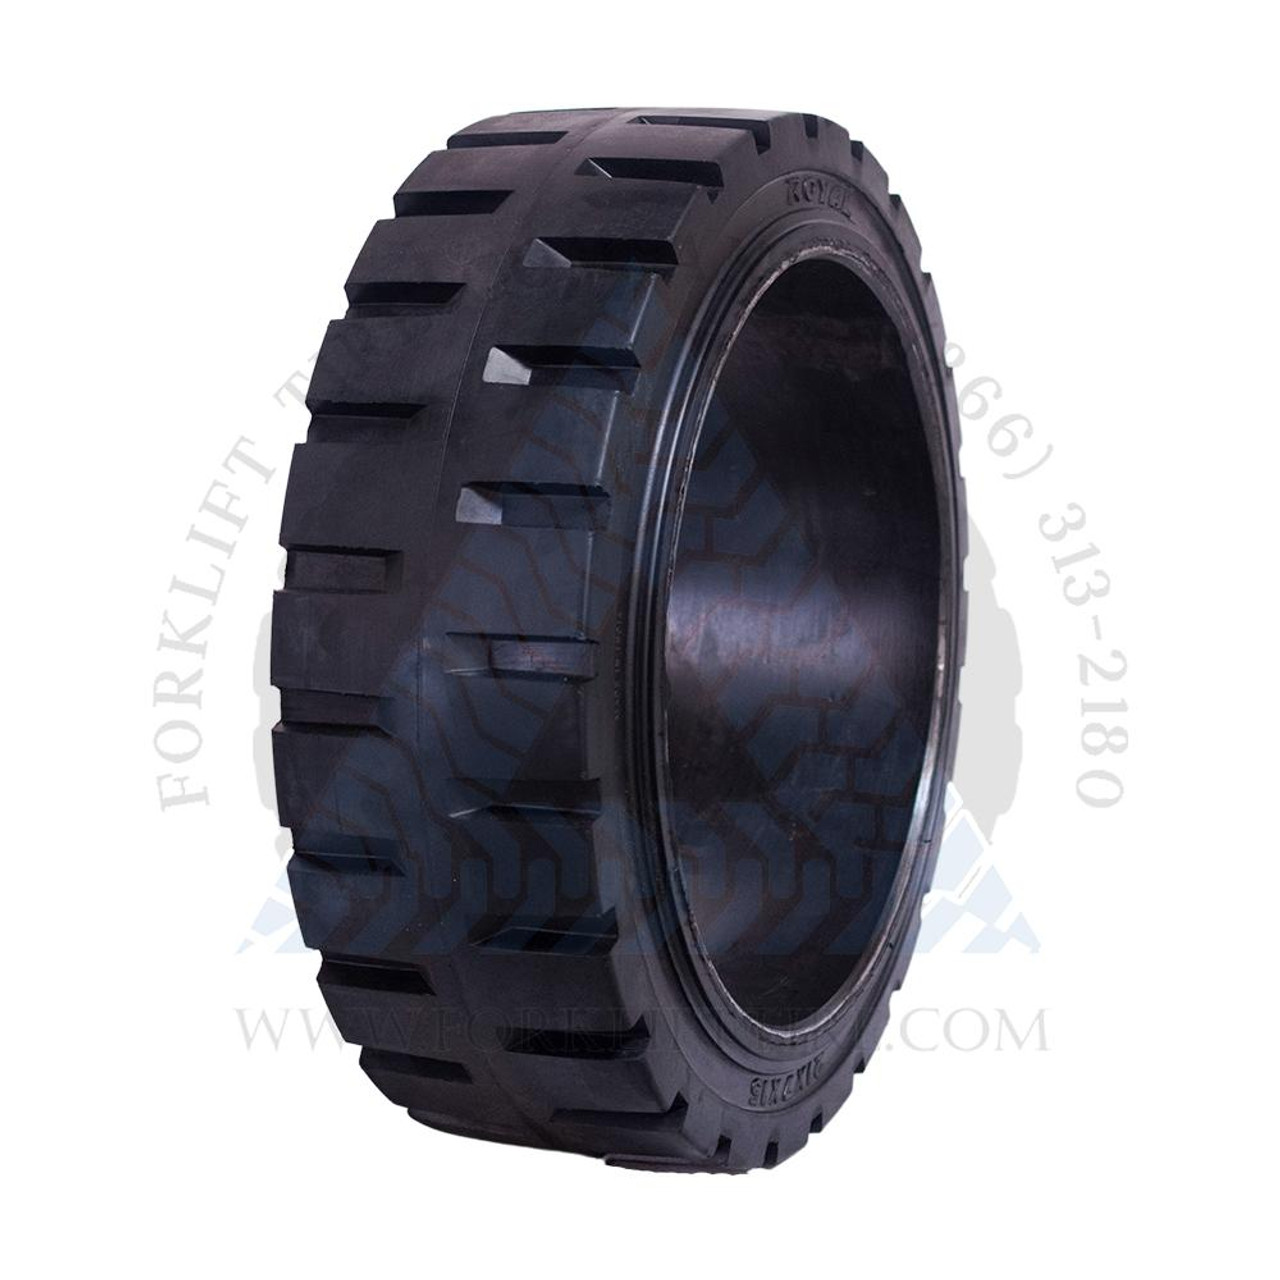 18X7X12-1/8 | 15X5X11-1/4 CUSHION SOLID FORKLIFT TIRES | TR 4X DEAL